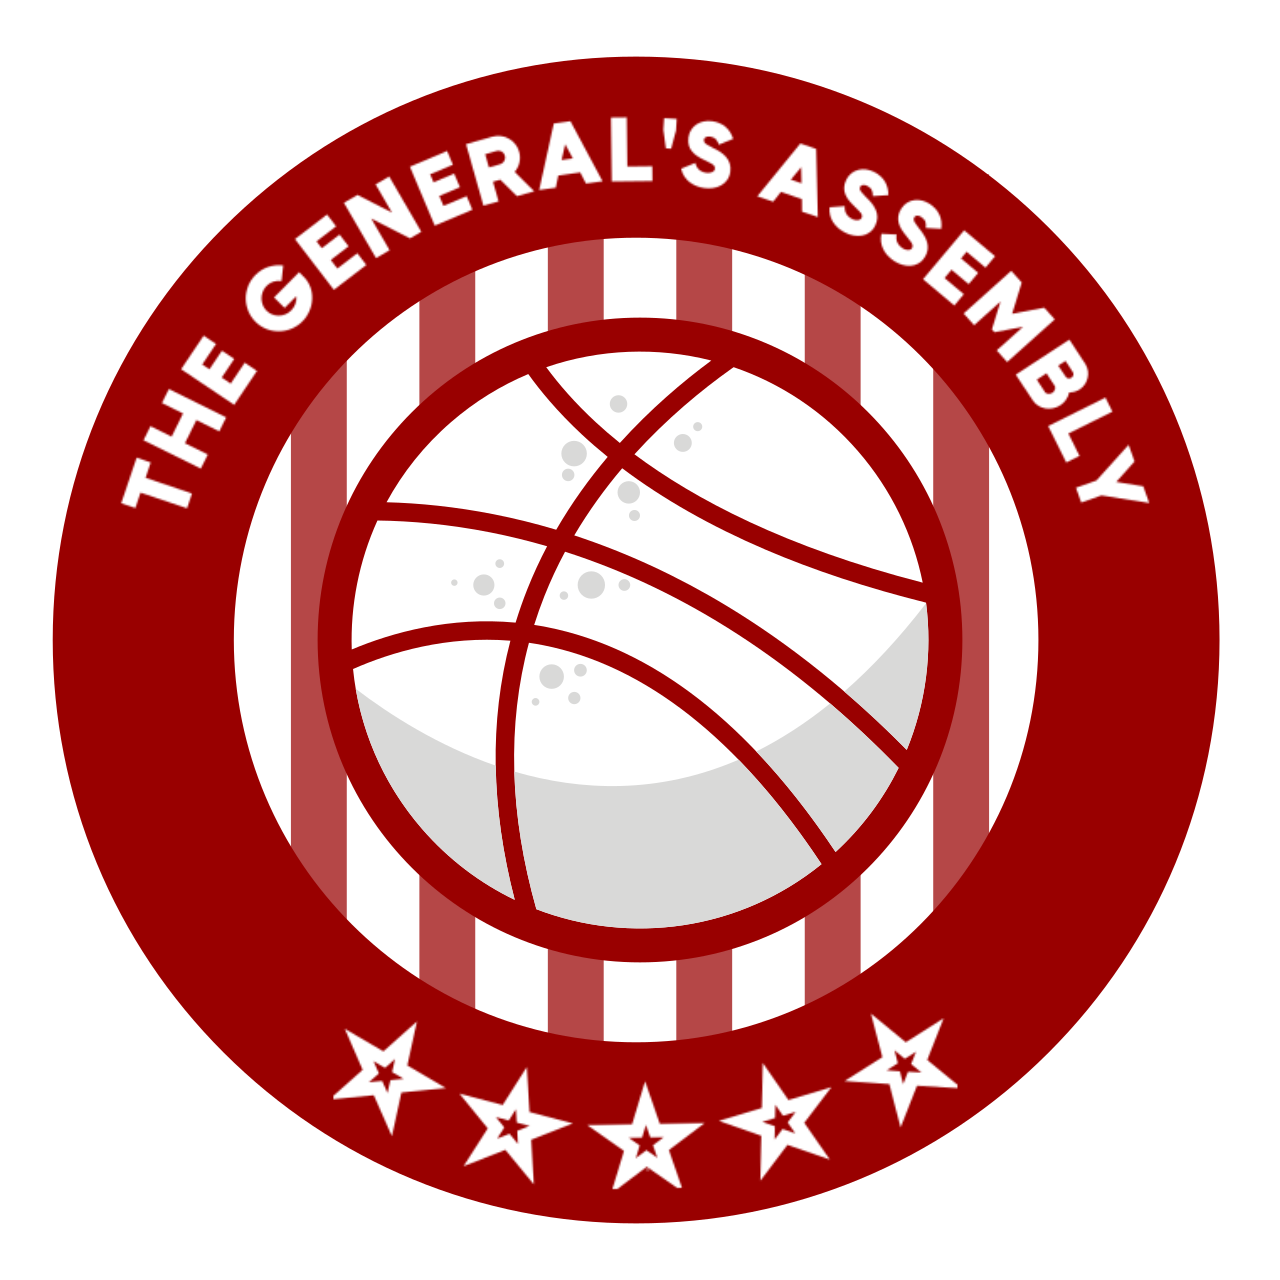 The General&#39;s Assembly - Indiana University Hoosiers Basketball Memorabilia